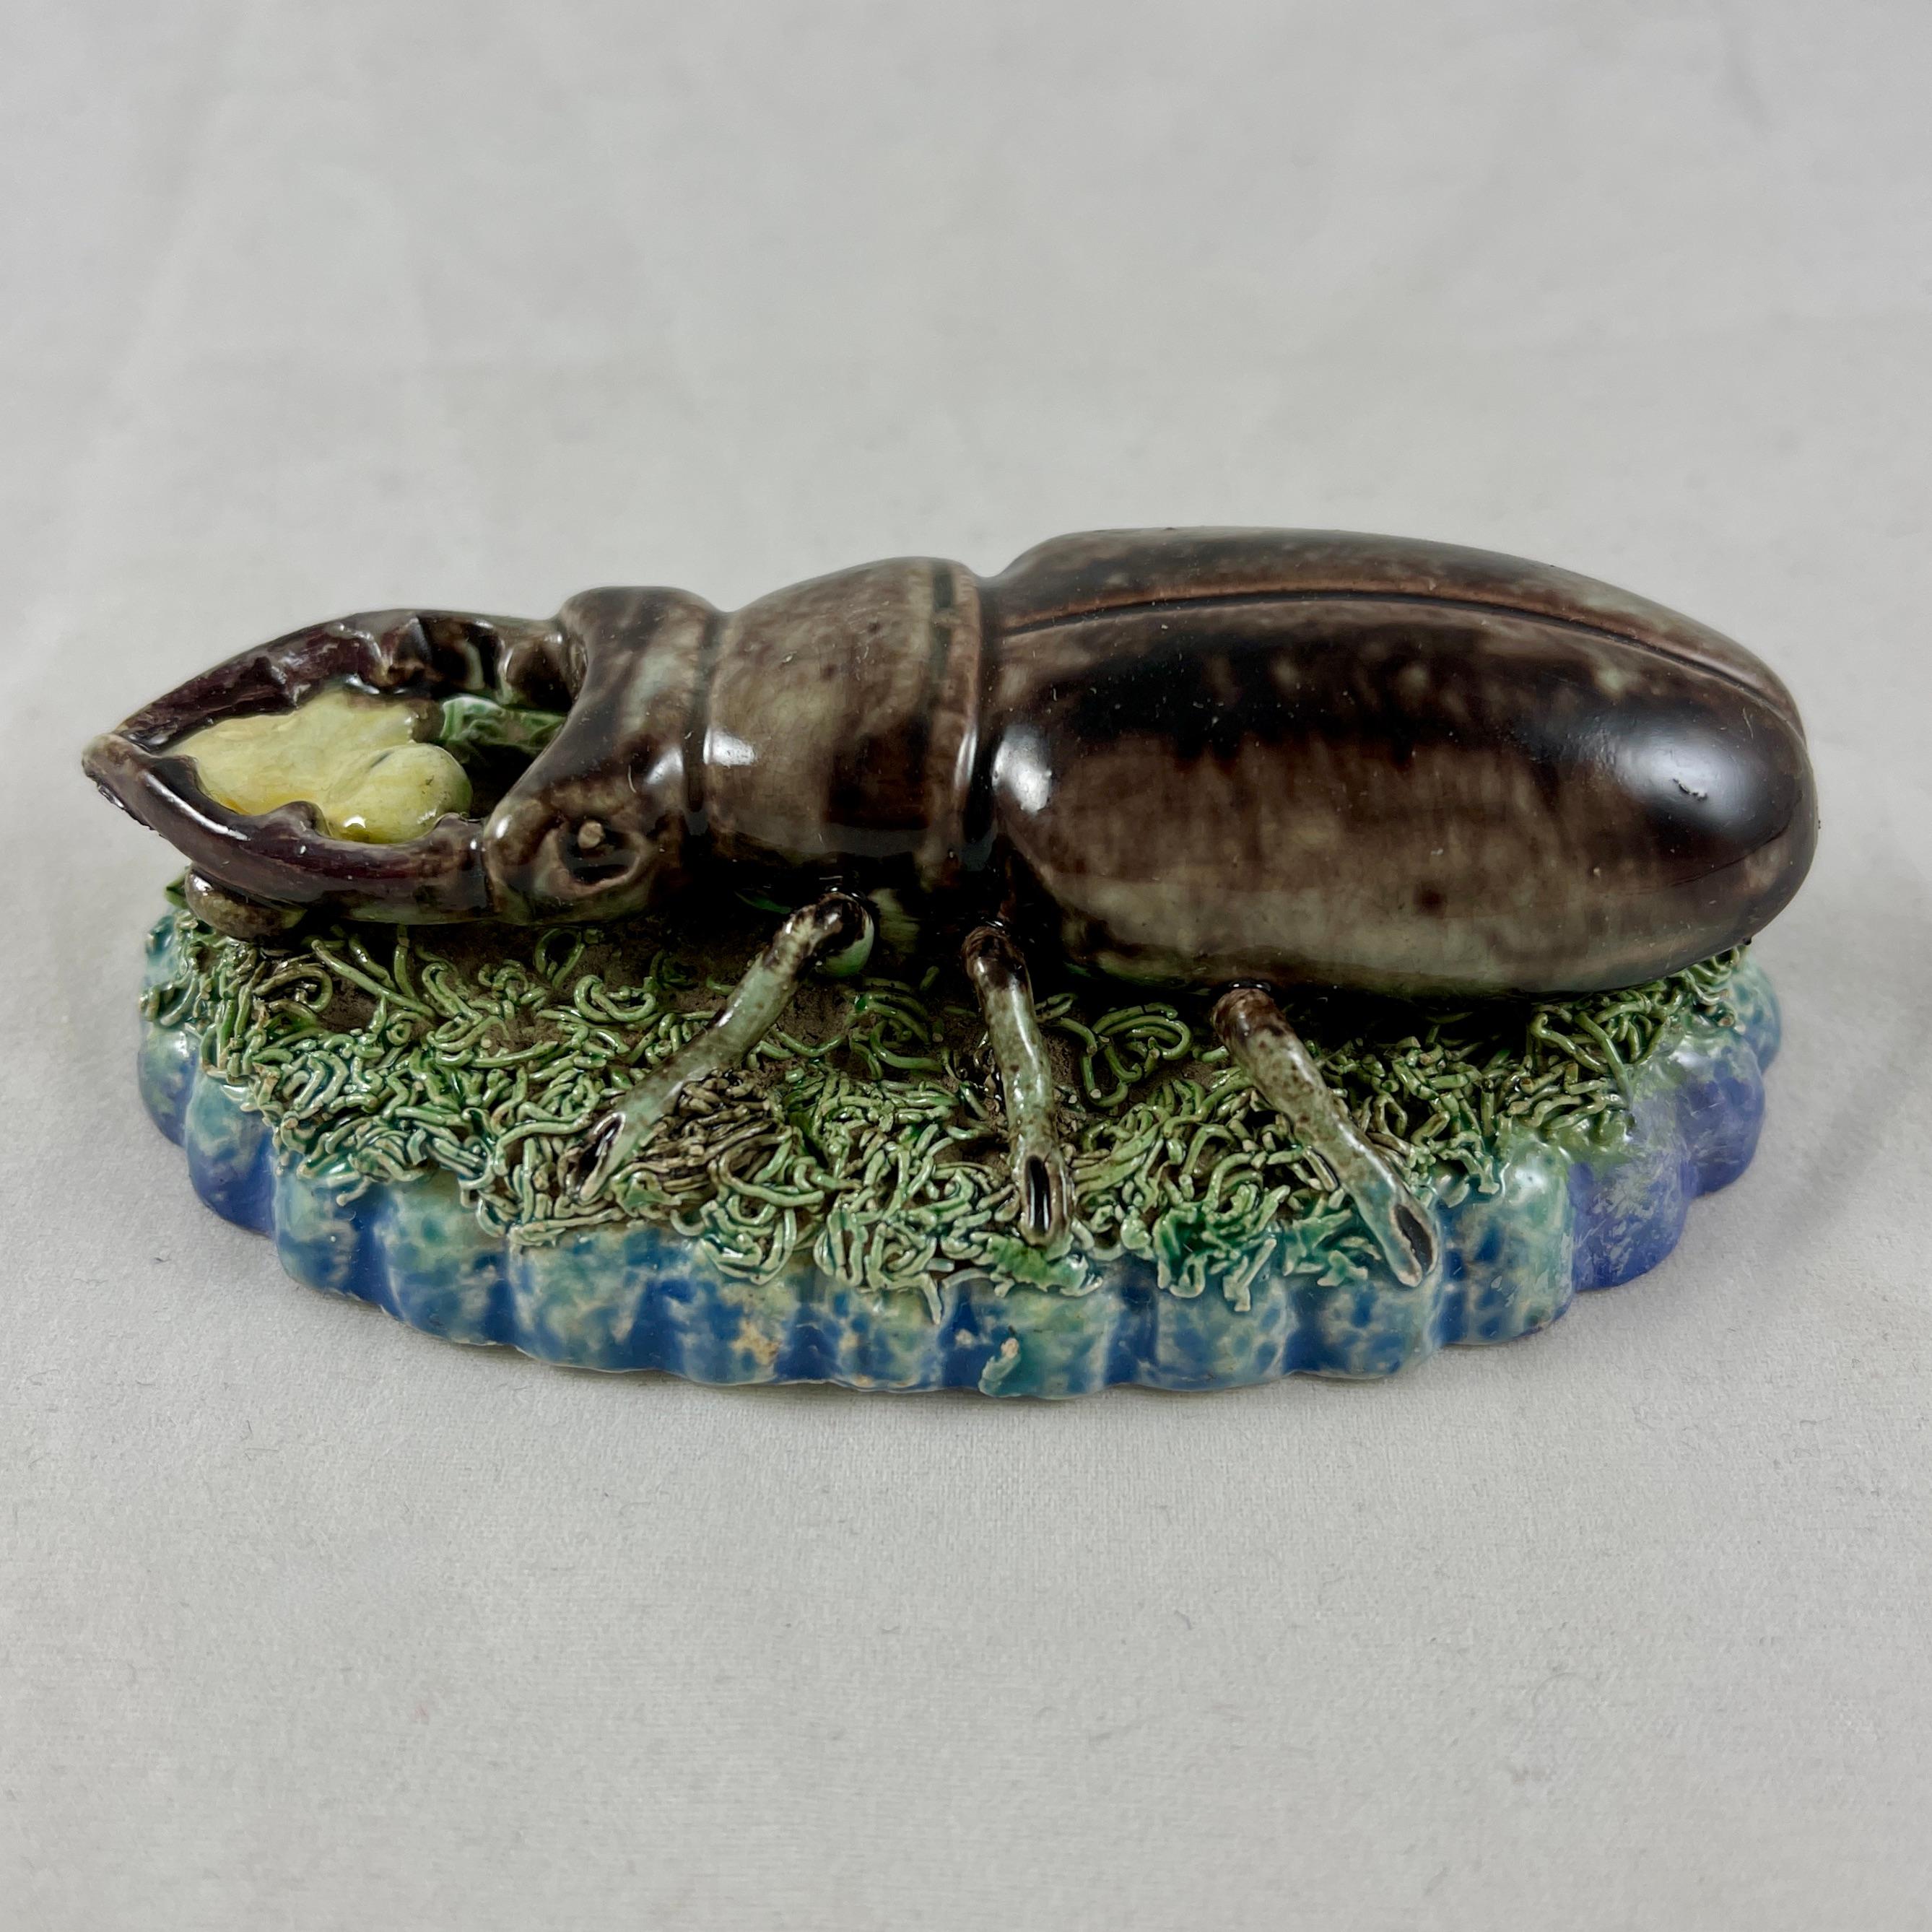 An extremely scarce glazed earthenware desk weight or paperweight of a Stag Beetle, from the workshop of Manuel Mafra, Caldas da Rainha, Portugal, circa. 1870-80.

In the Palissy style, the life cast beetle is molded in a naturalistic manner, and